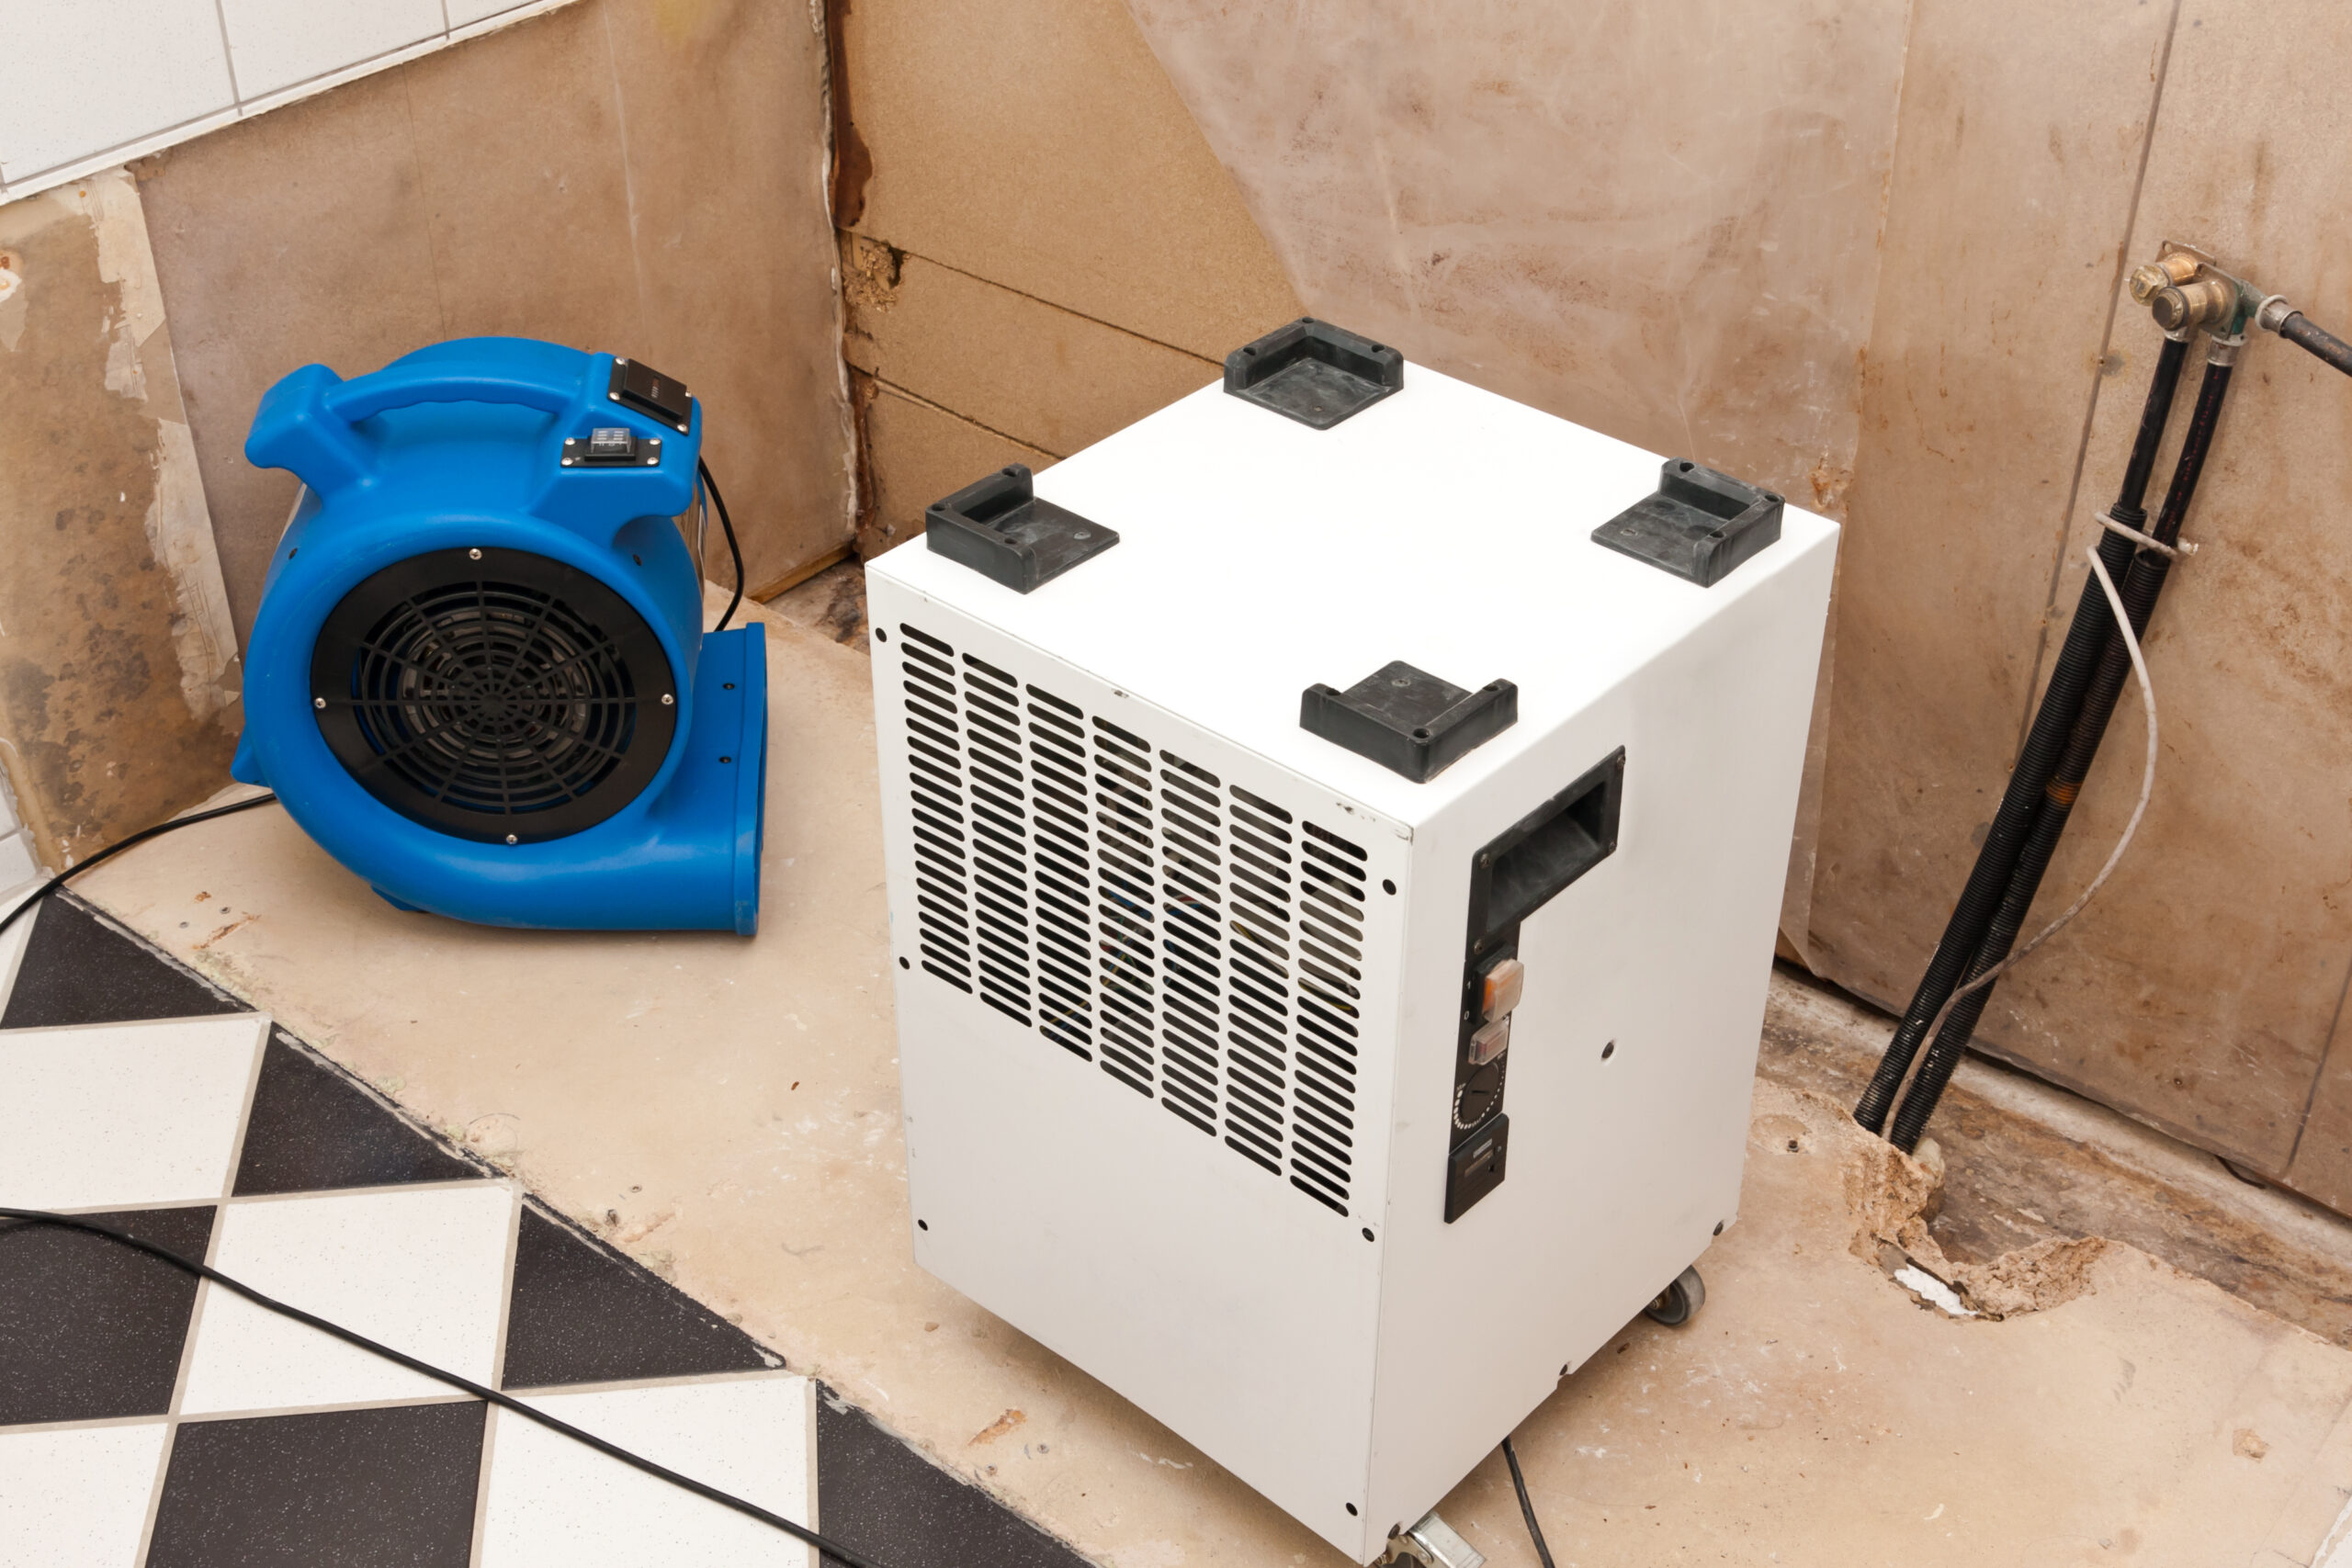 Elimination of water damage with fan and dryer